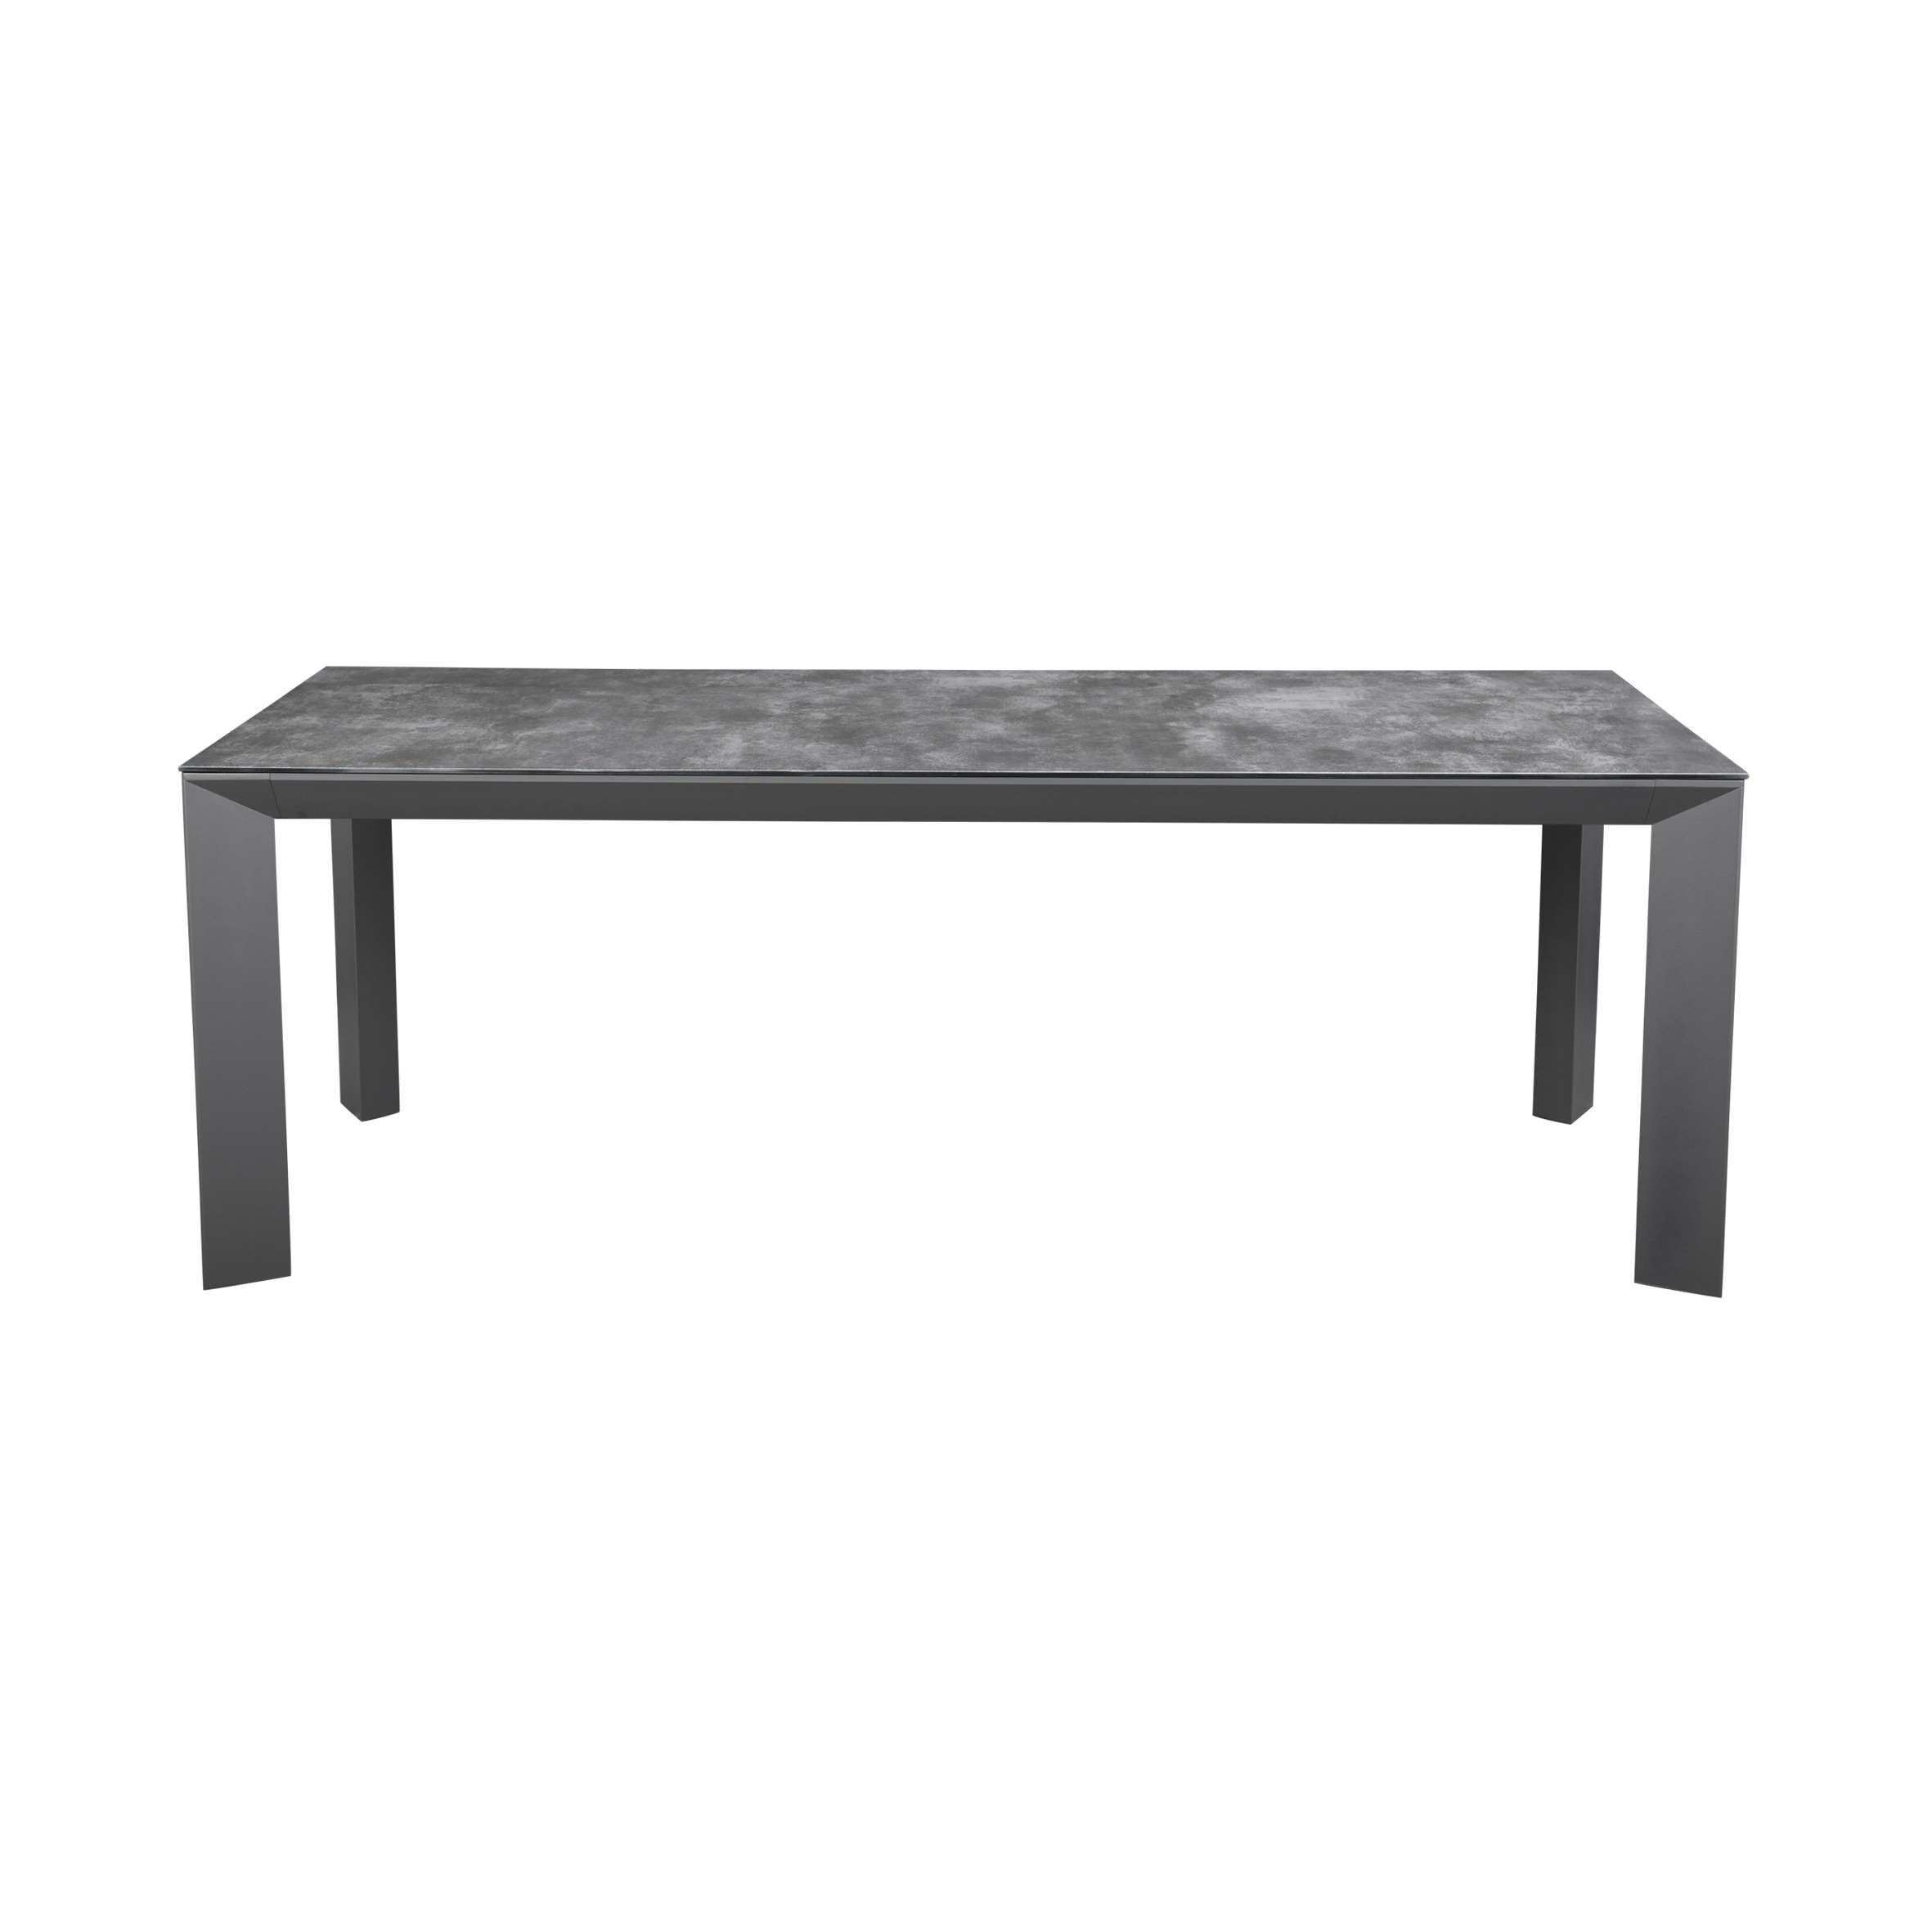 Zeus rectangle dining table S2